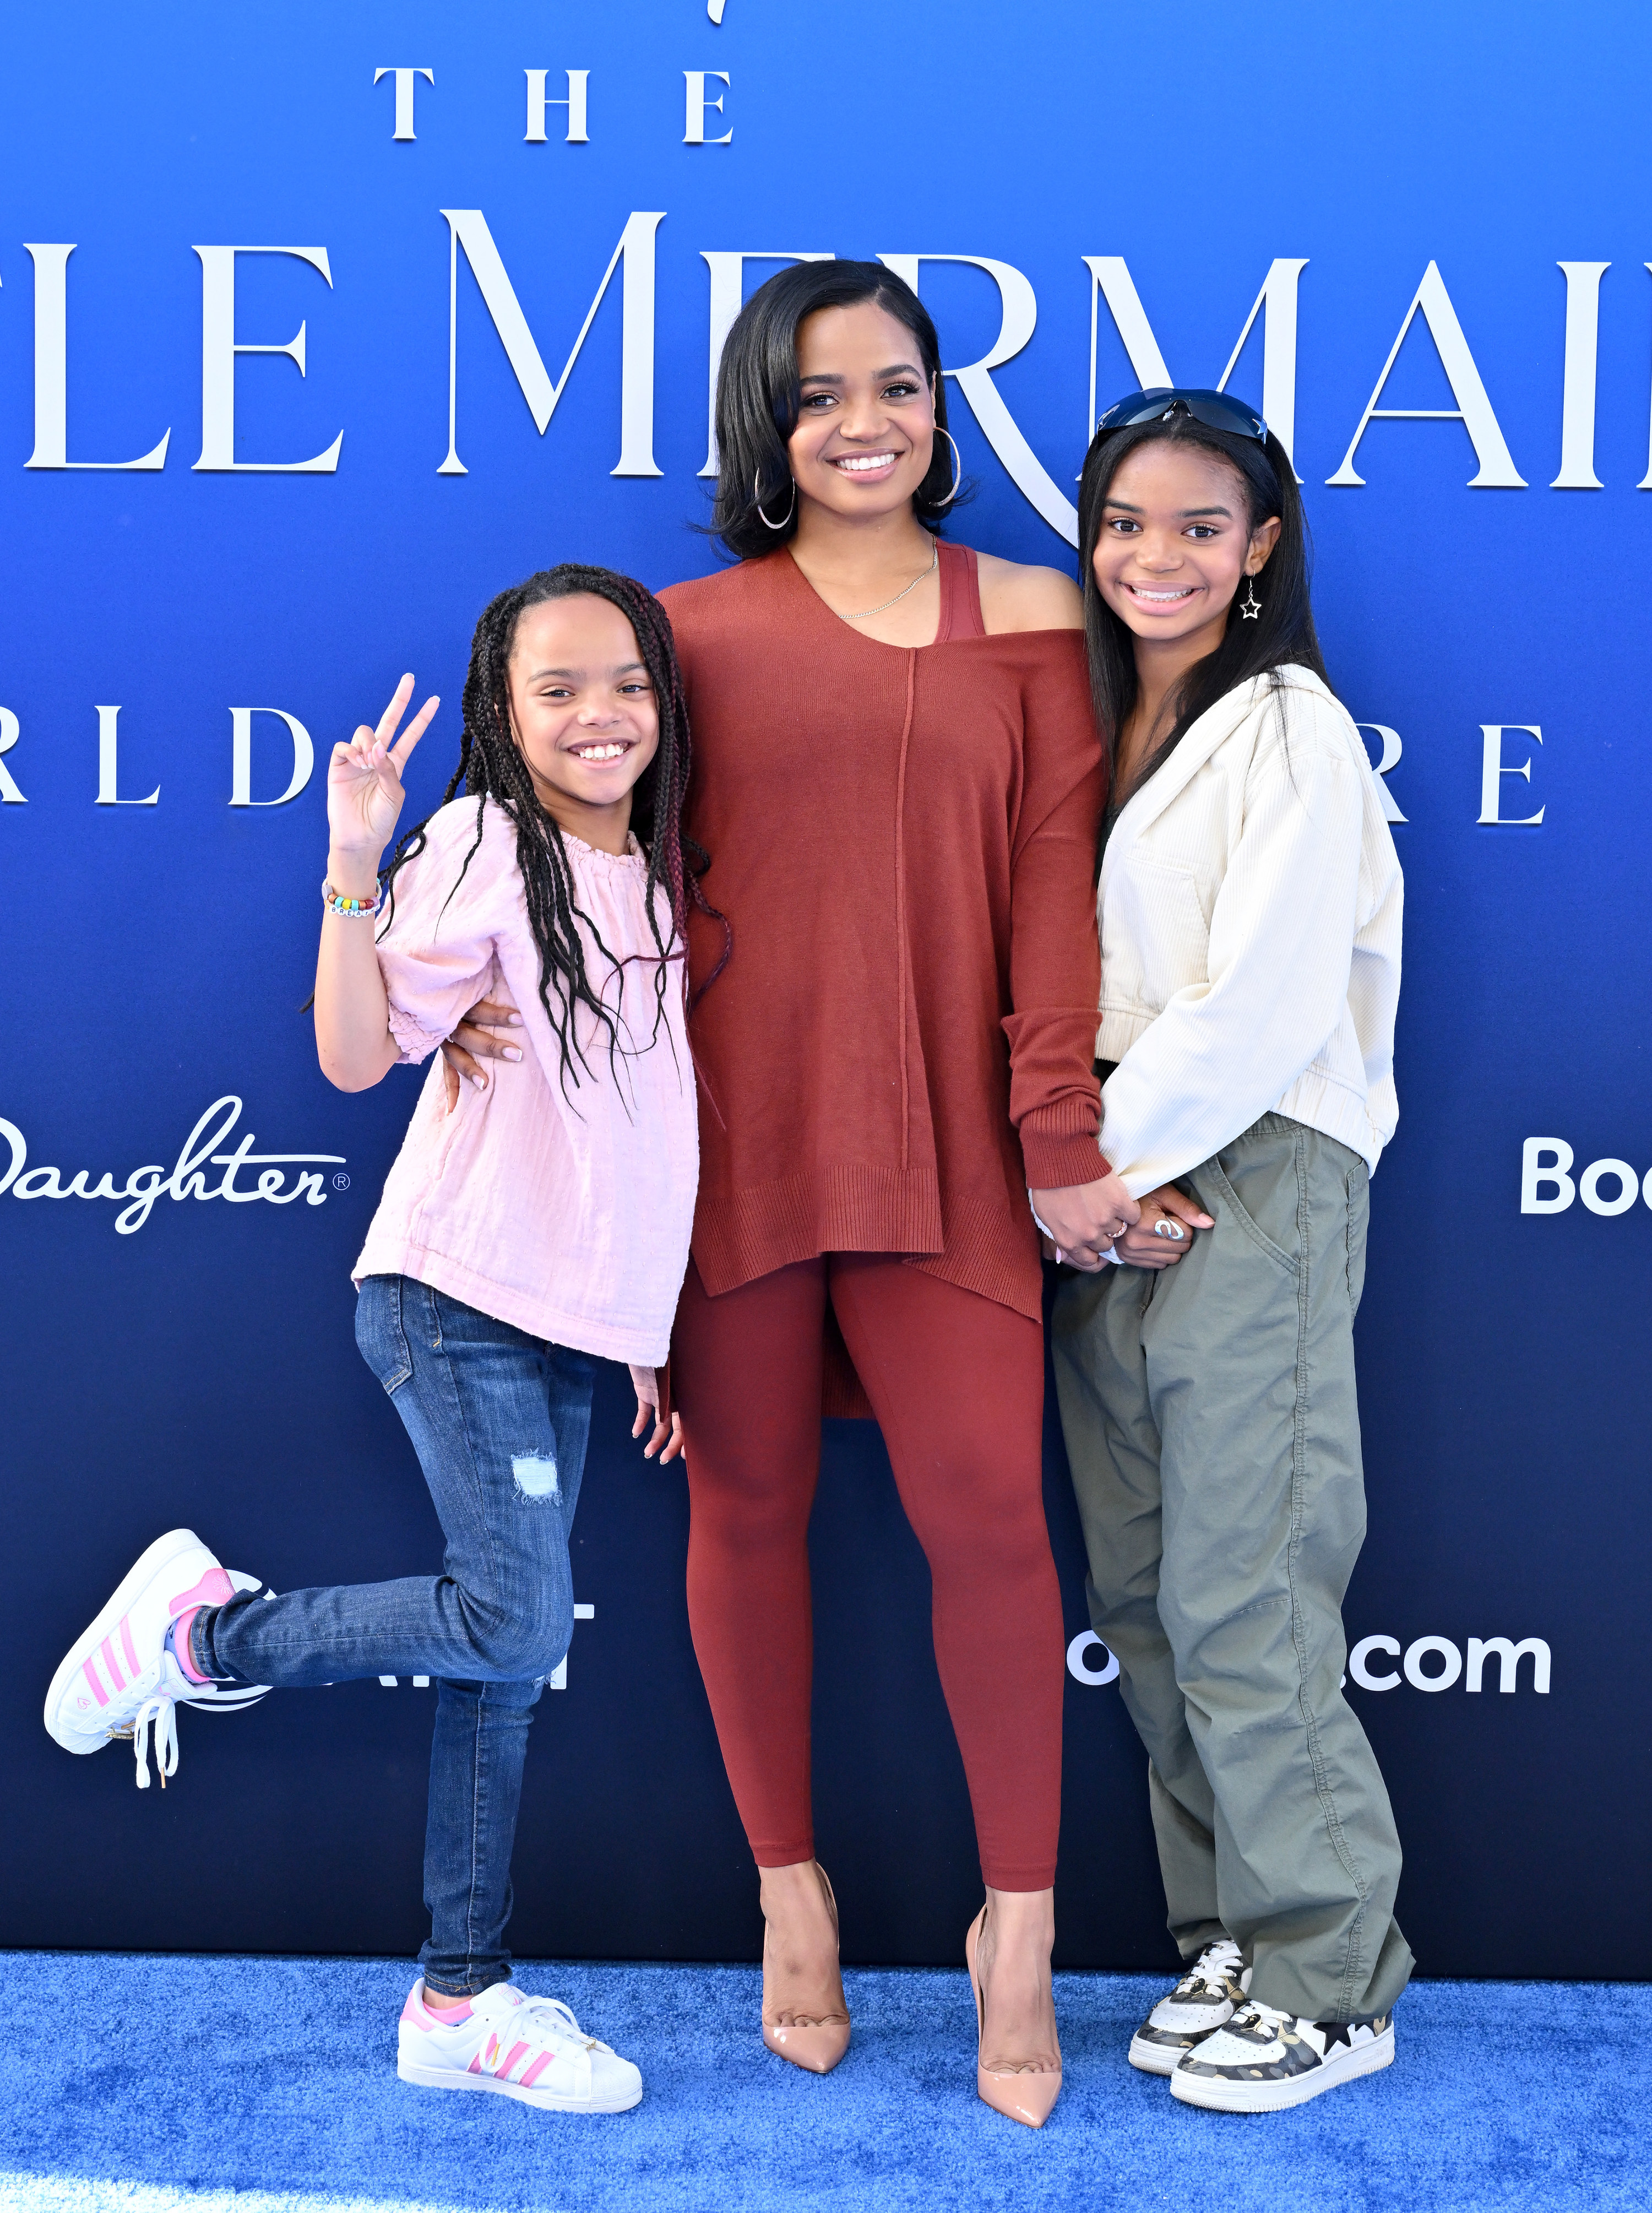 Kyla in the outfit with two young girls